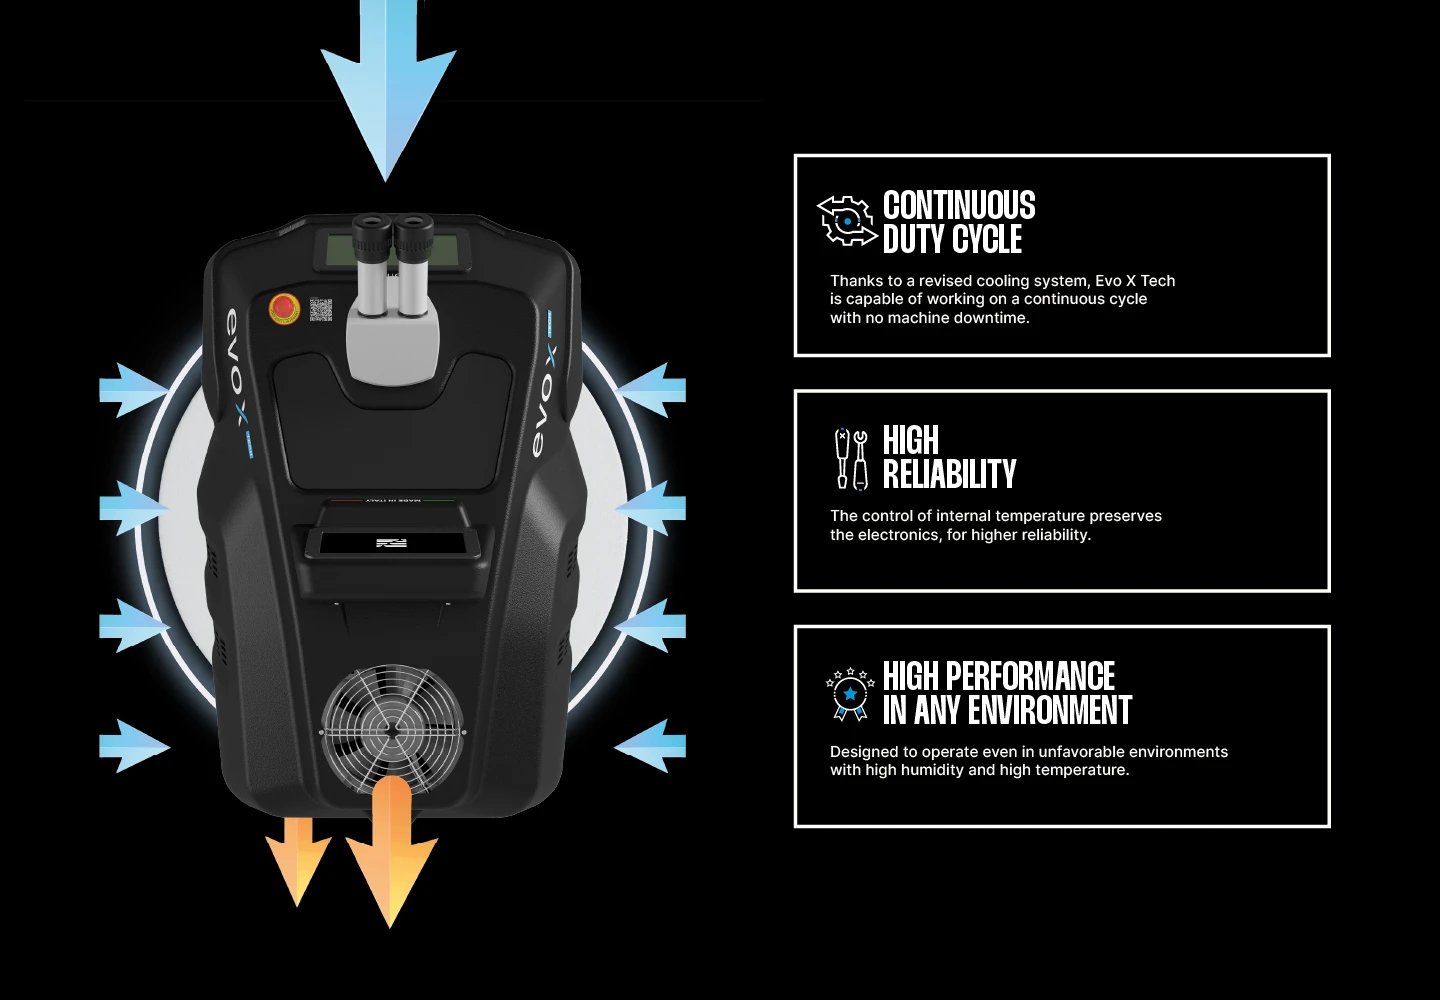 The new advanced cooling system allows the Orotig Evo X Tech laser welder to operate on a continuous cycle.